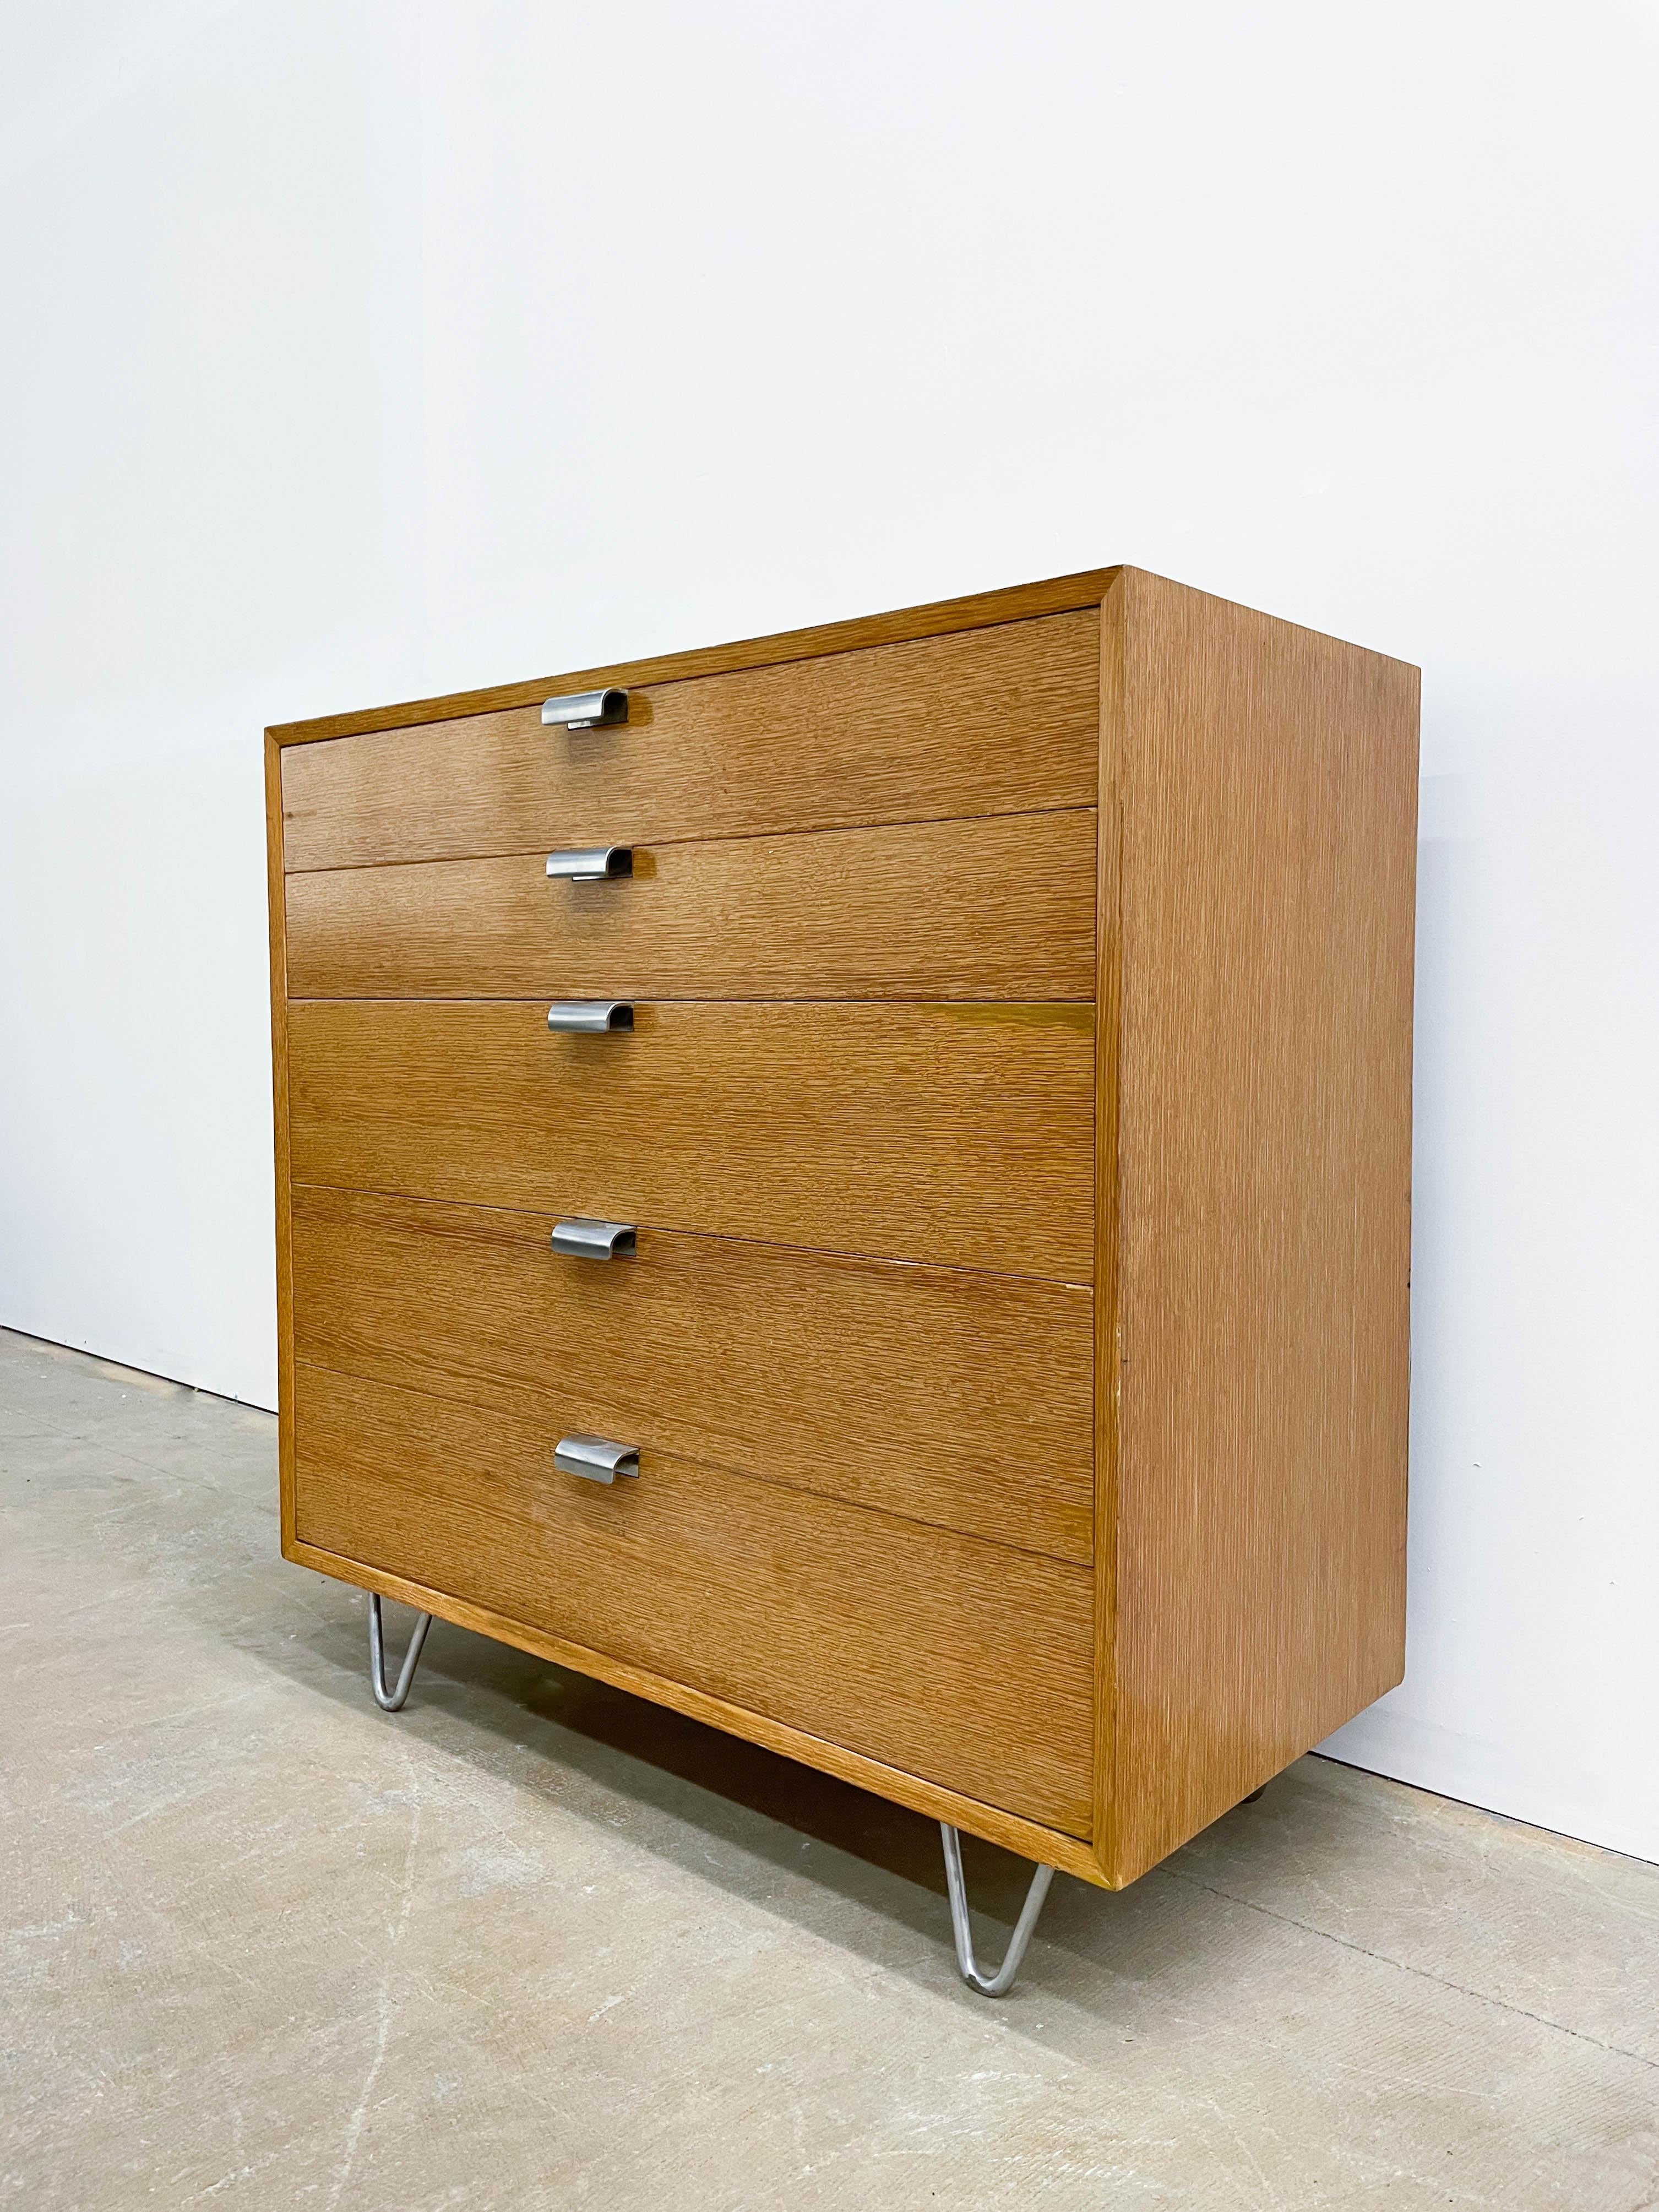 This iconic dresser comes from George Nelson's first collection for Herman Miller in 1948. The impressive, tall dresser boasts chrome pulls and highly dought-after hairpin legs. The dresser is part of the first Basic Cabinet Series, now more